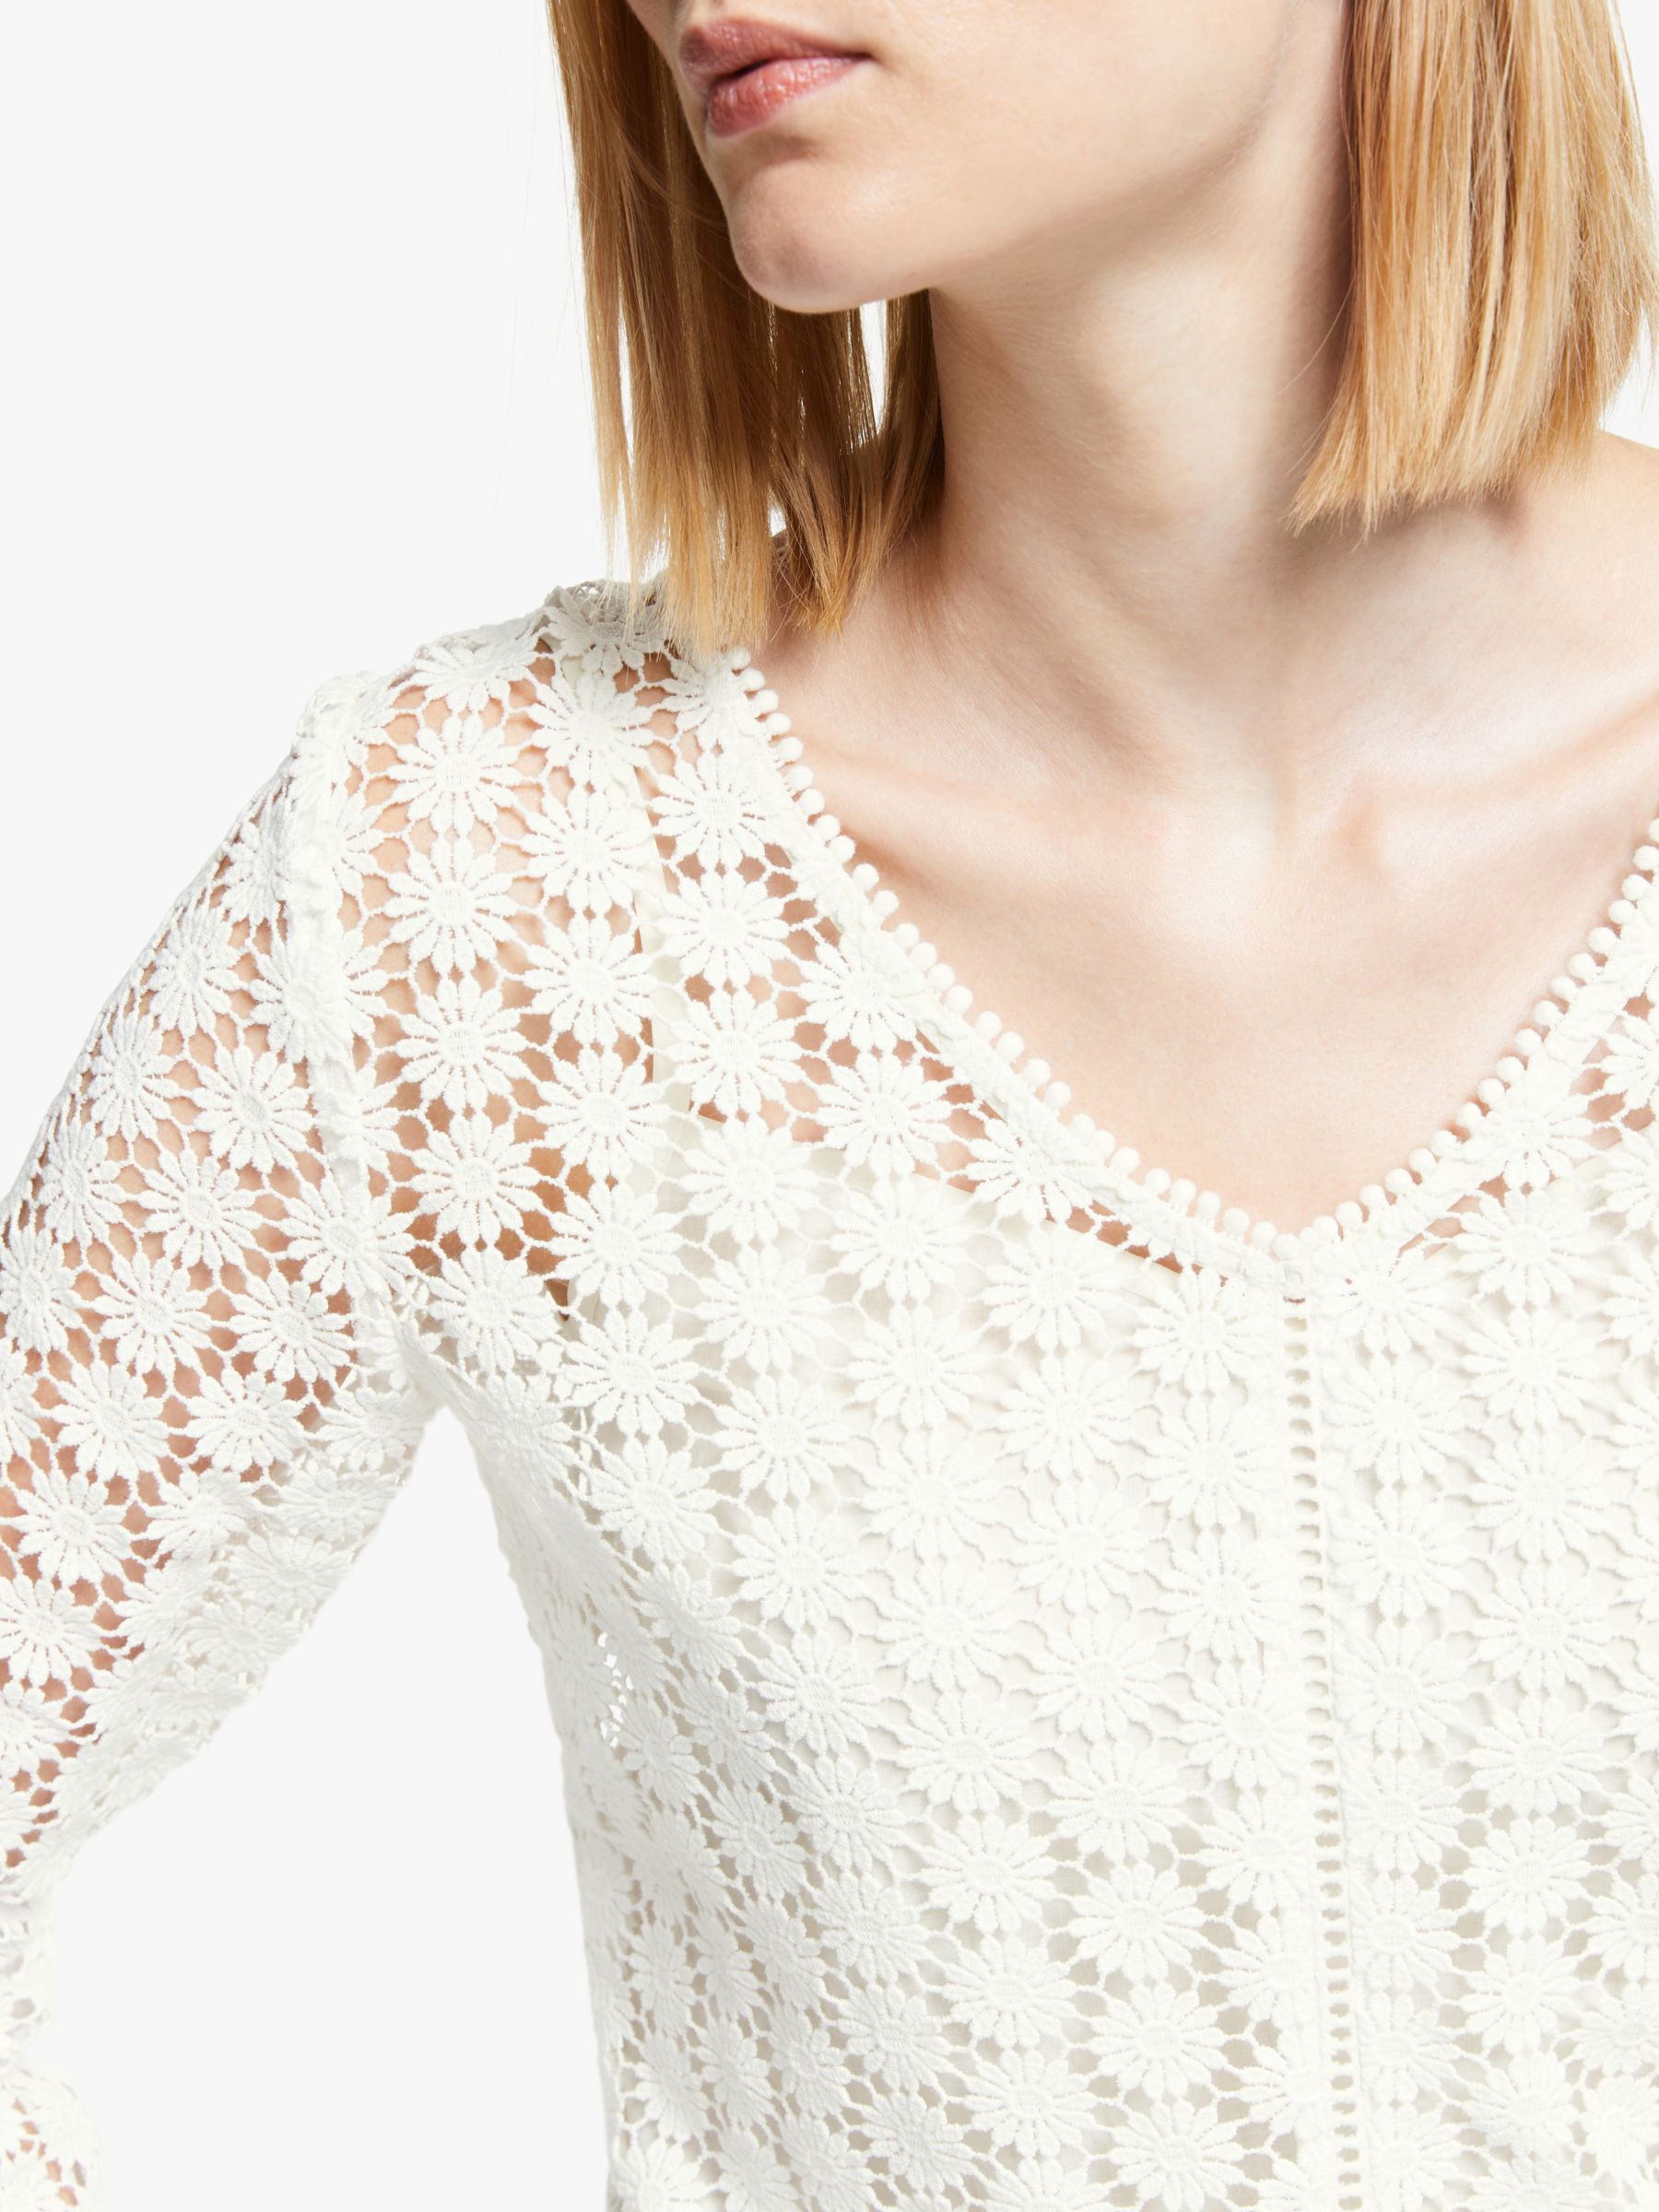 Boden Arabella Lace Top, Ivory at John Lewis & Partners